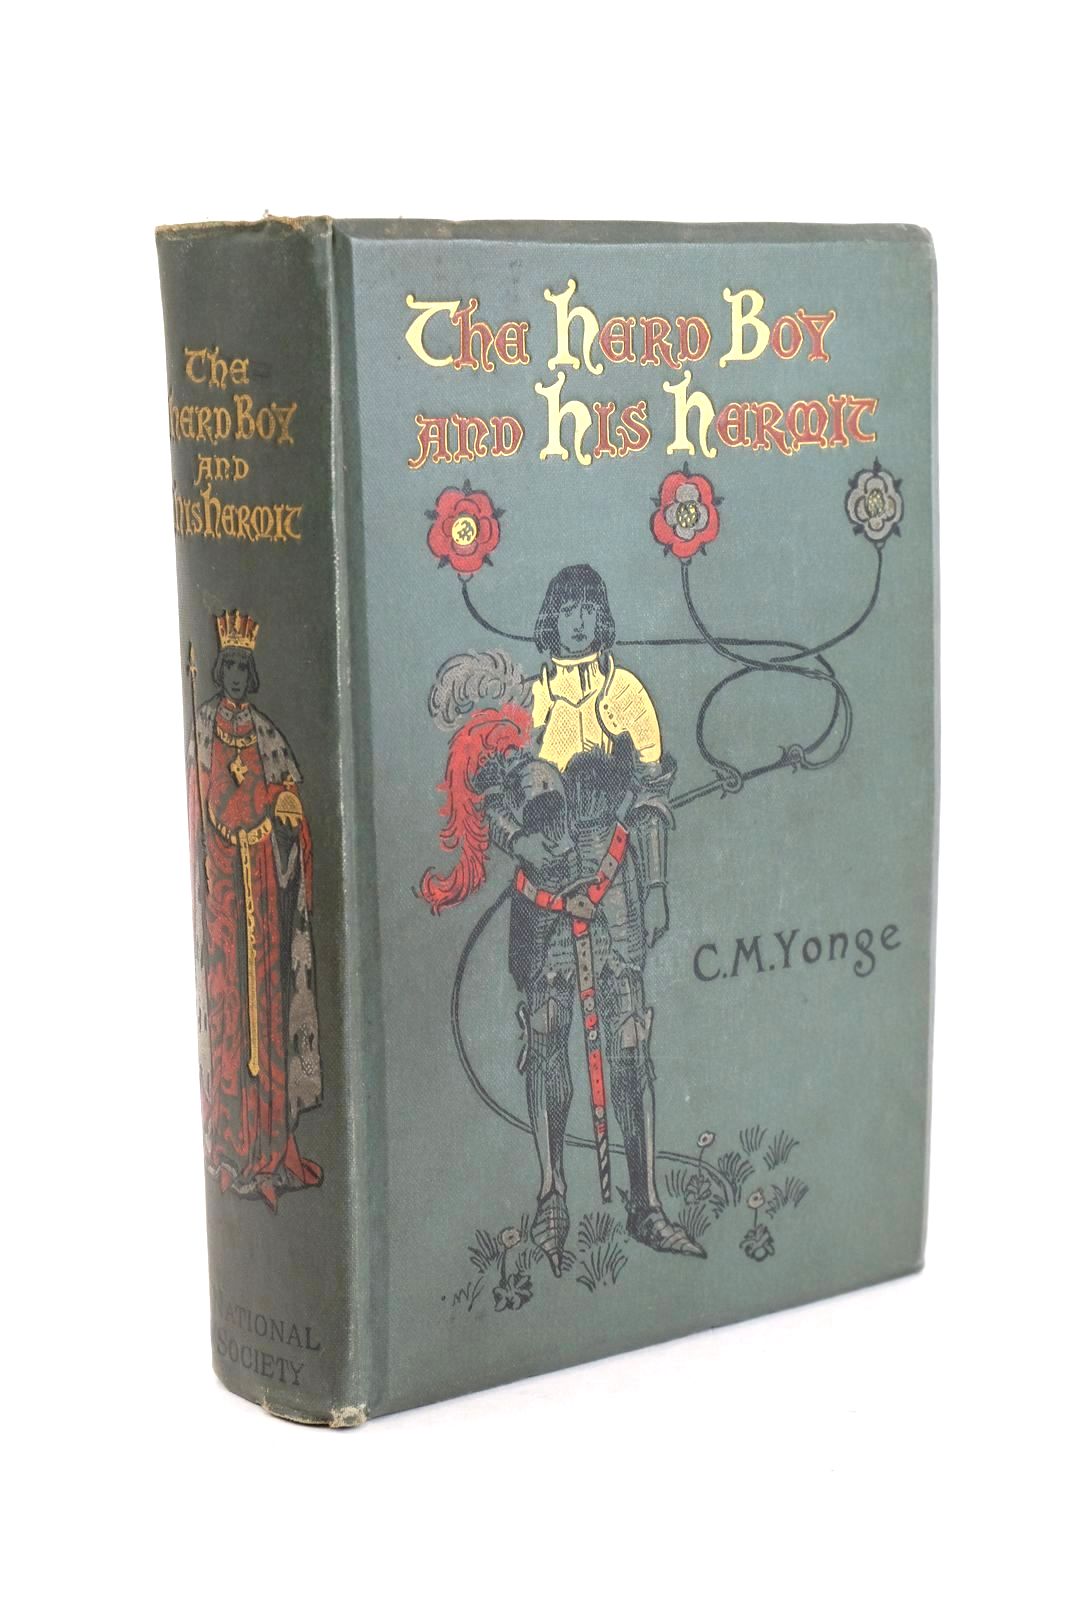 Photo of THE HERD BOY AND HIS HERMIT written by Yonge, Charlotte M. illustrated by Stacey, W.S. published by National Society's Depository (STOCK CODE: 1324468)  for sale by Stella & Rose's Books